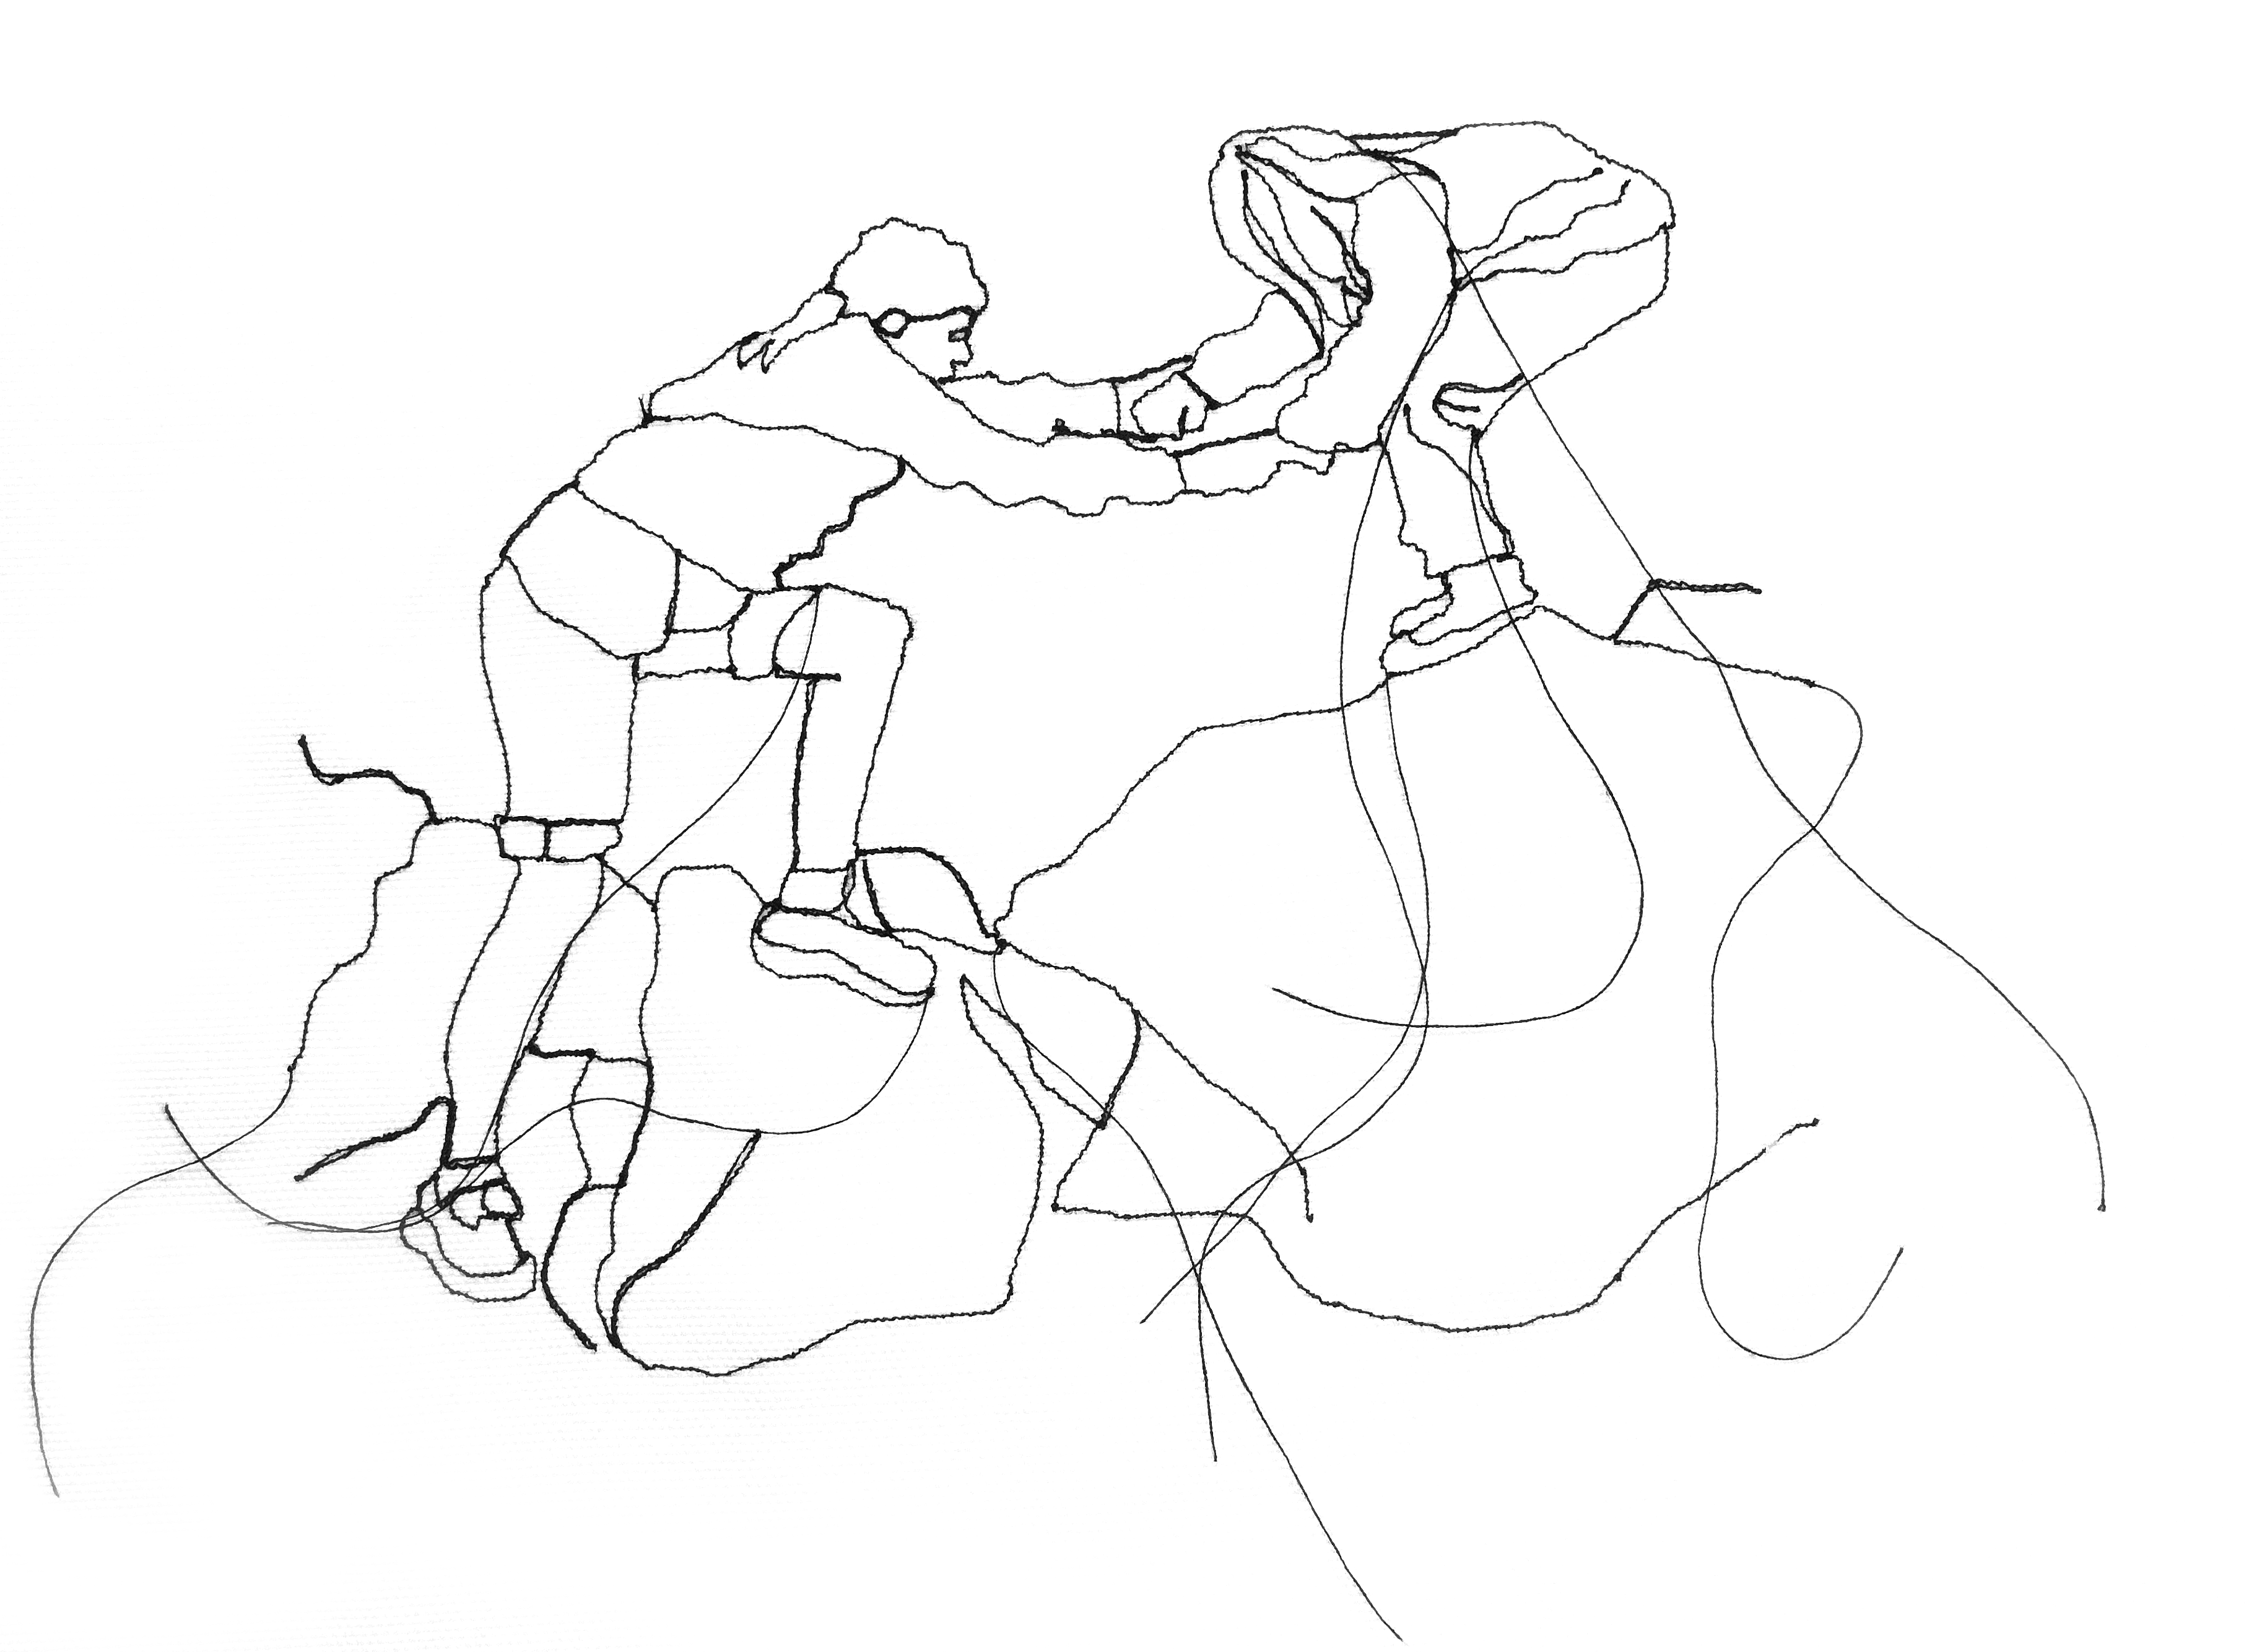 Sketch drawing of one hiker helping another to cross a rocky pass. 